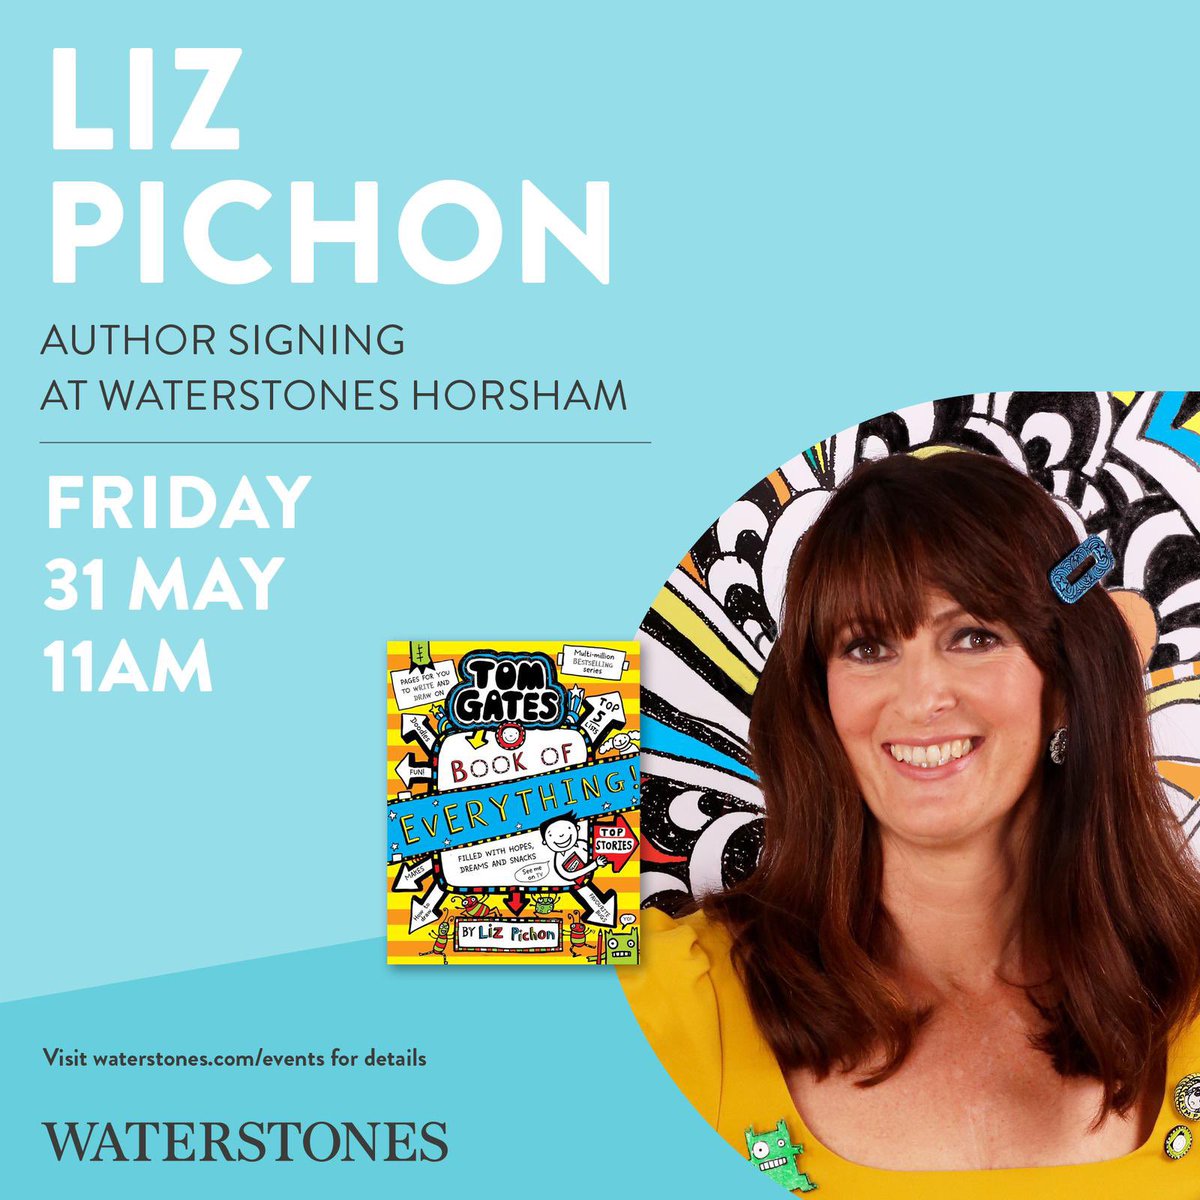 We are so happy to have the amazing @LizPichon visit us at Horsham 🎉🎉🎉🎉. Save the date @scholasticuk